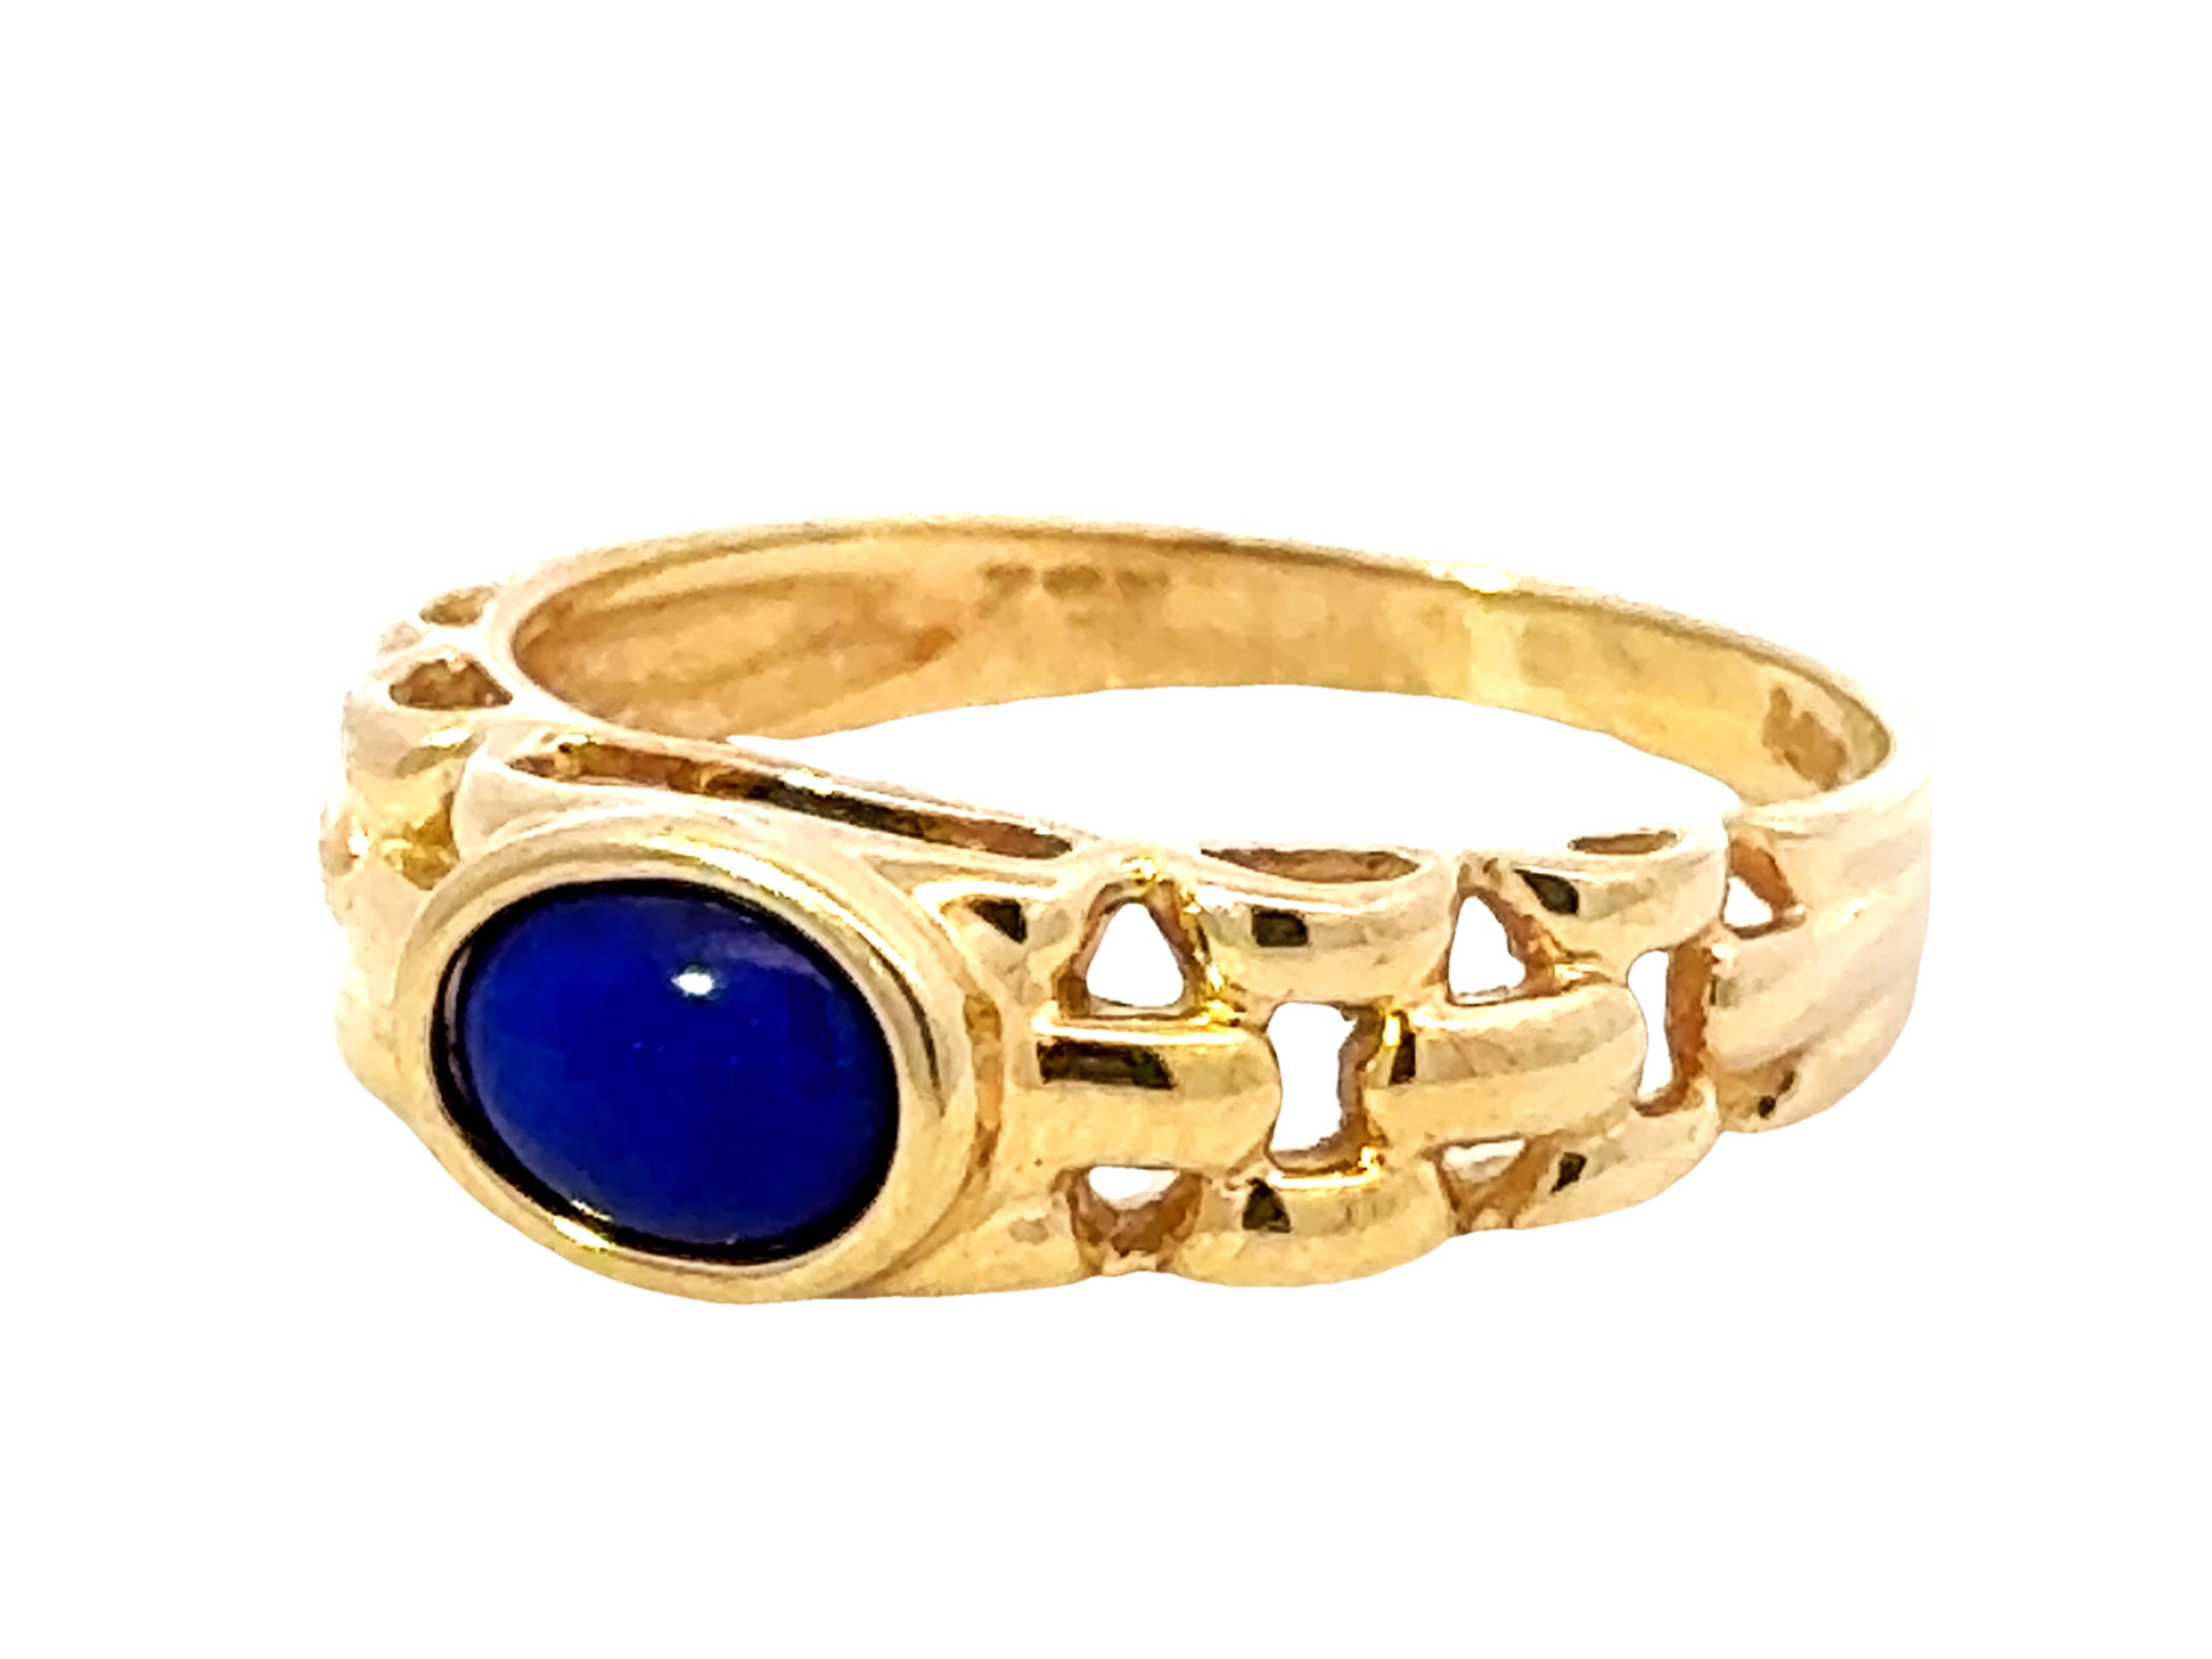 Oval Cut Oval Lapis Lazuli Band Ring 14k Yellow Gold For Sale